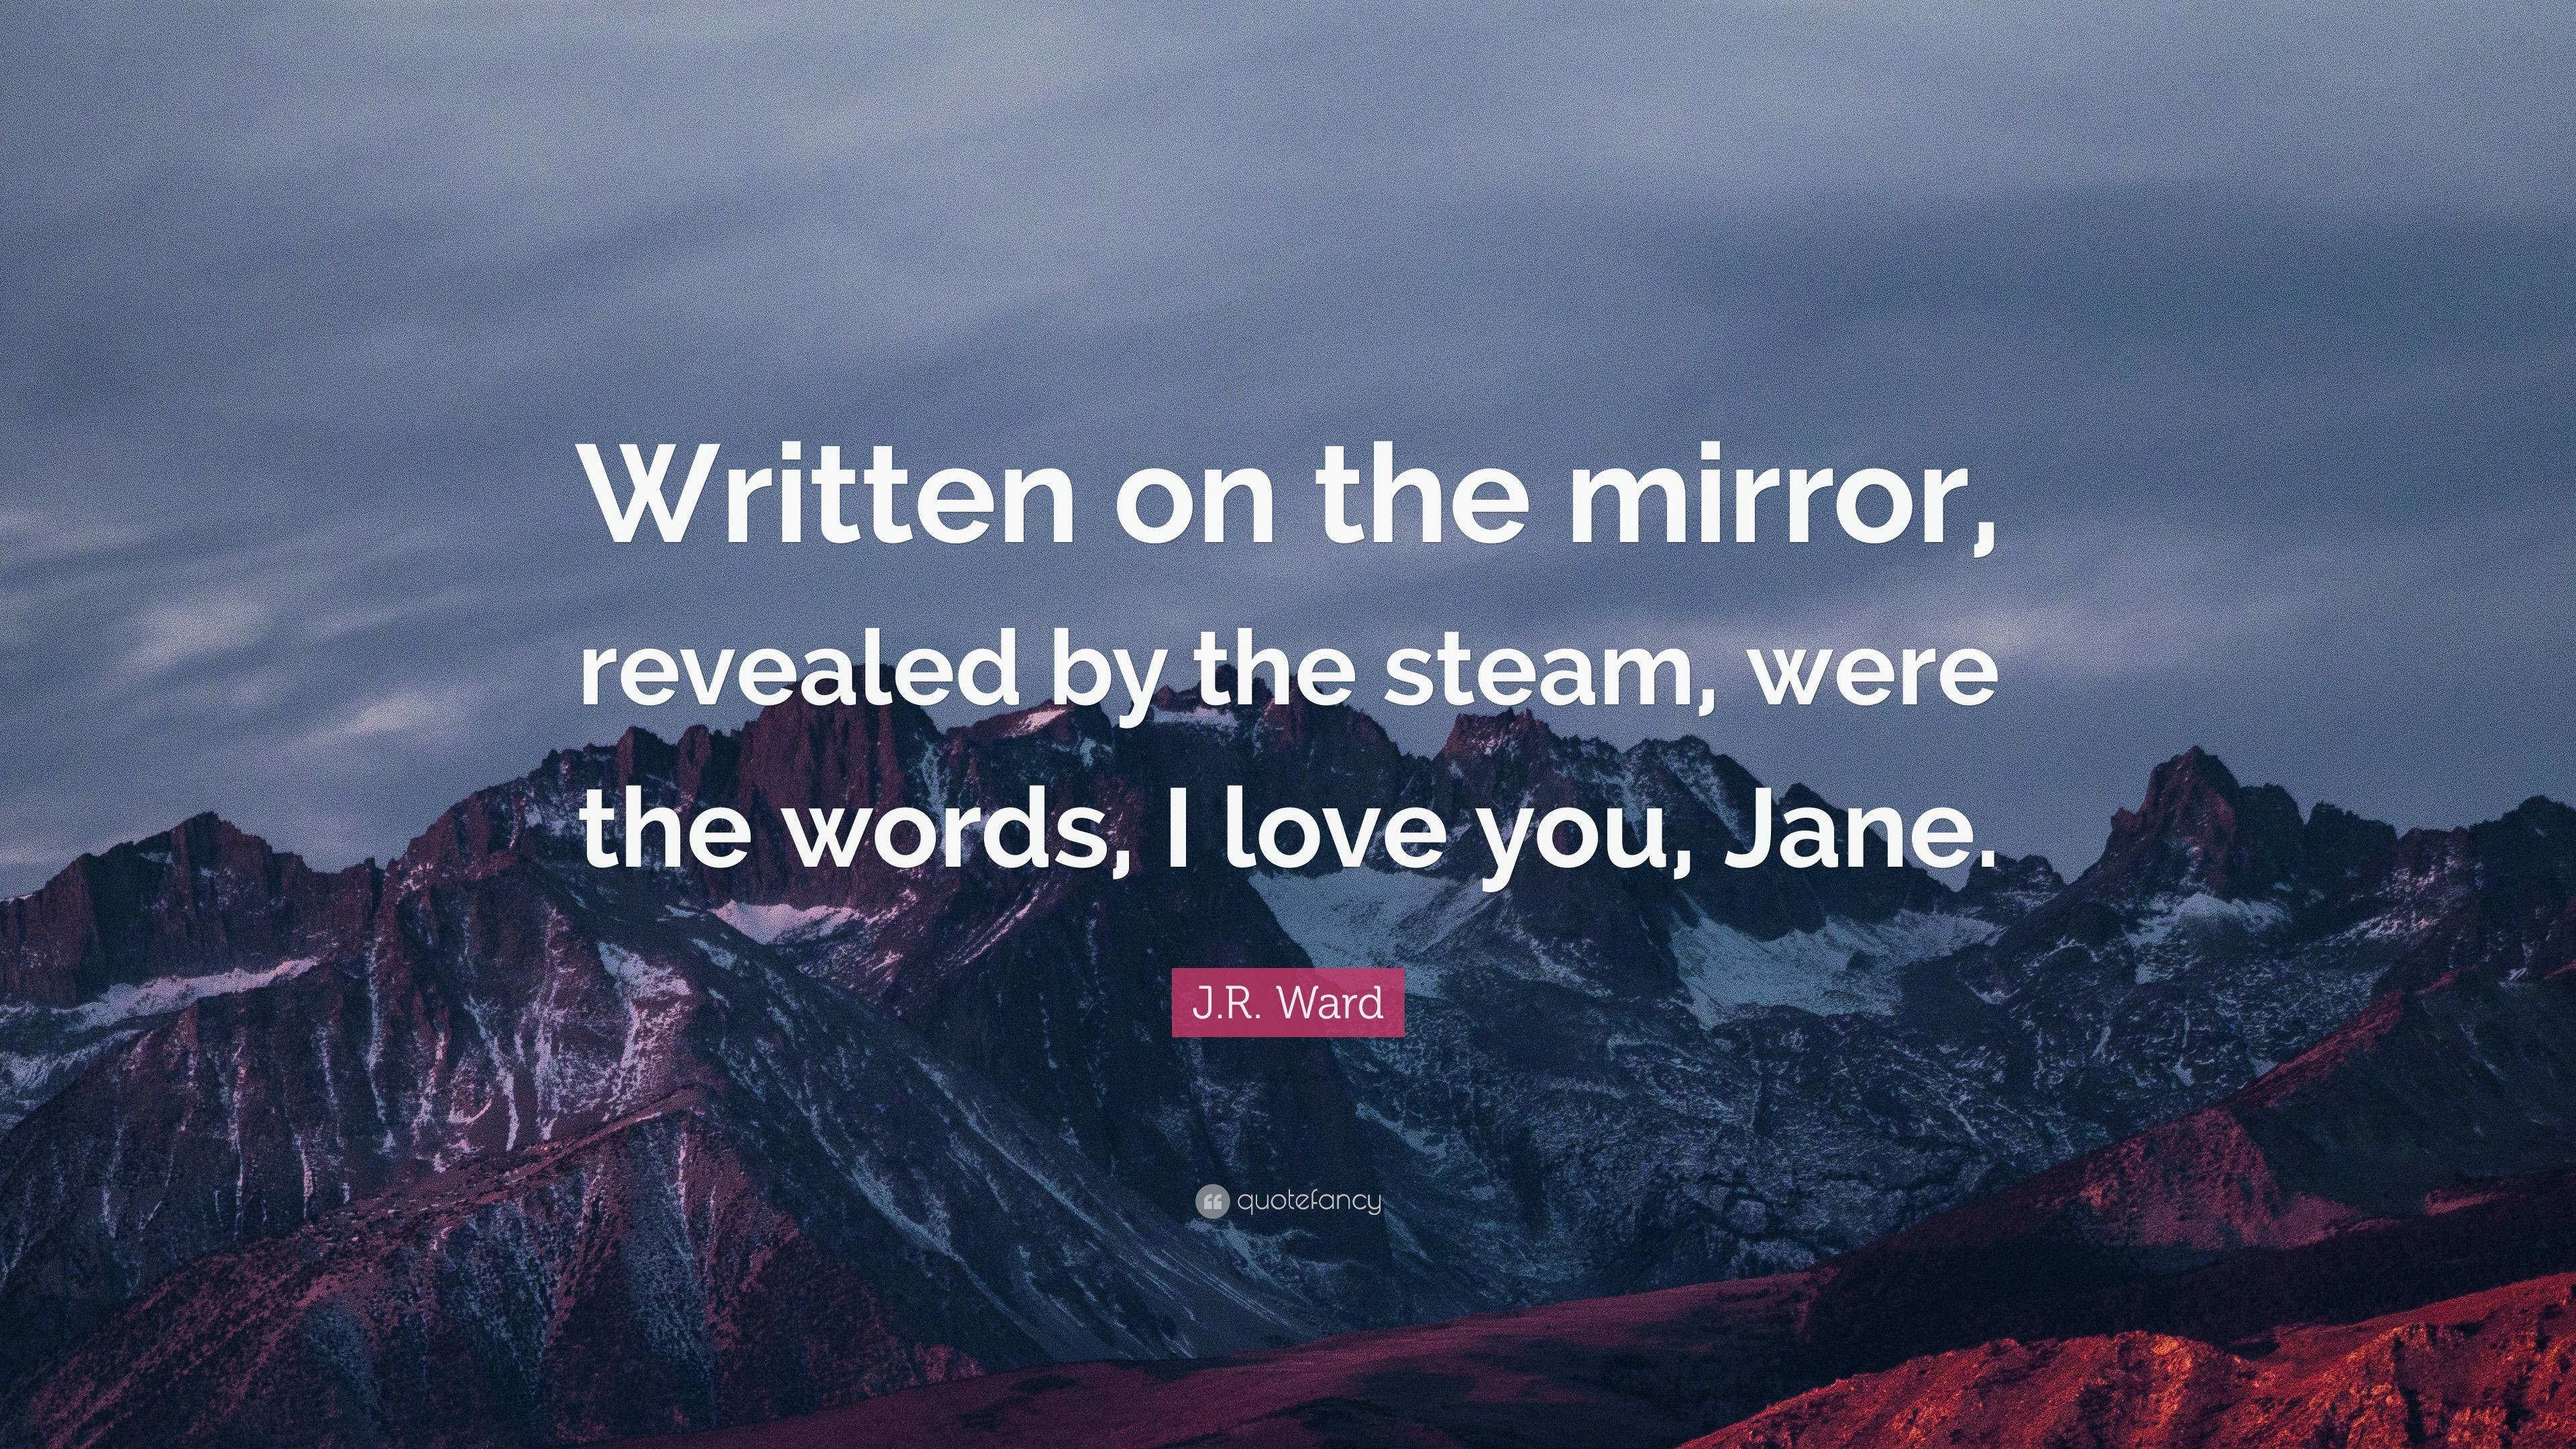 3840x2160 J.R. Ward Quote: “Written on the mirror, revealed by the steam, were